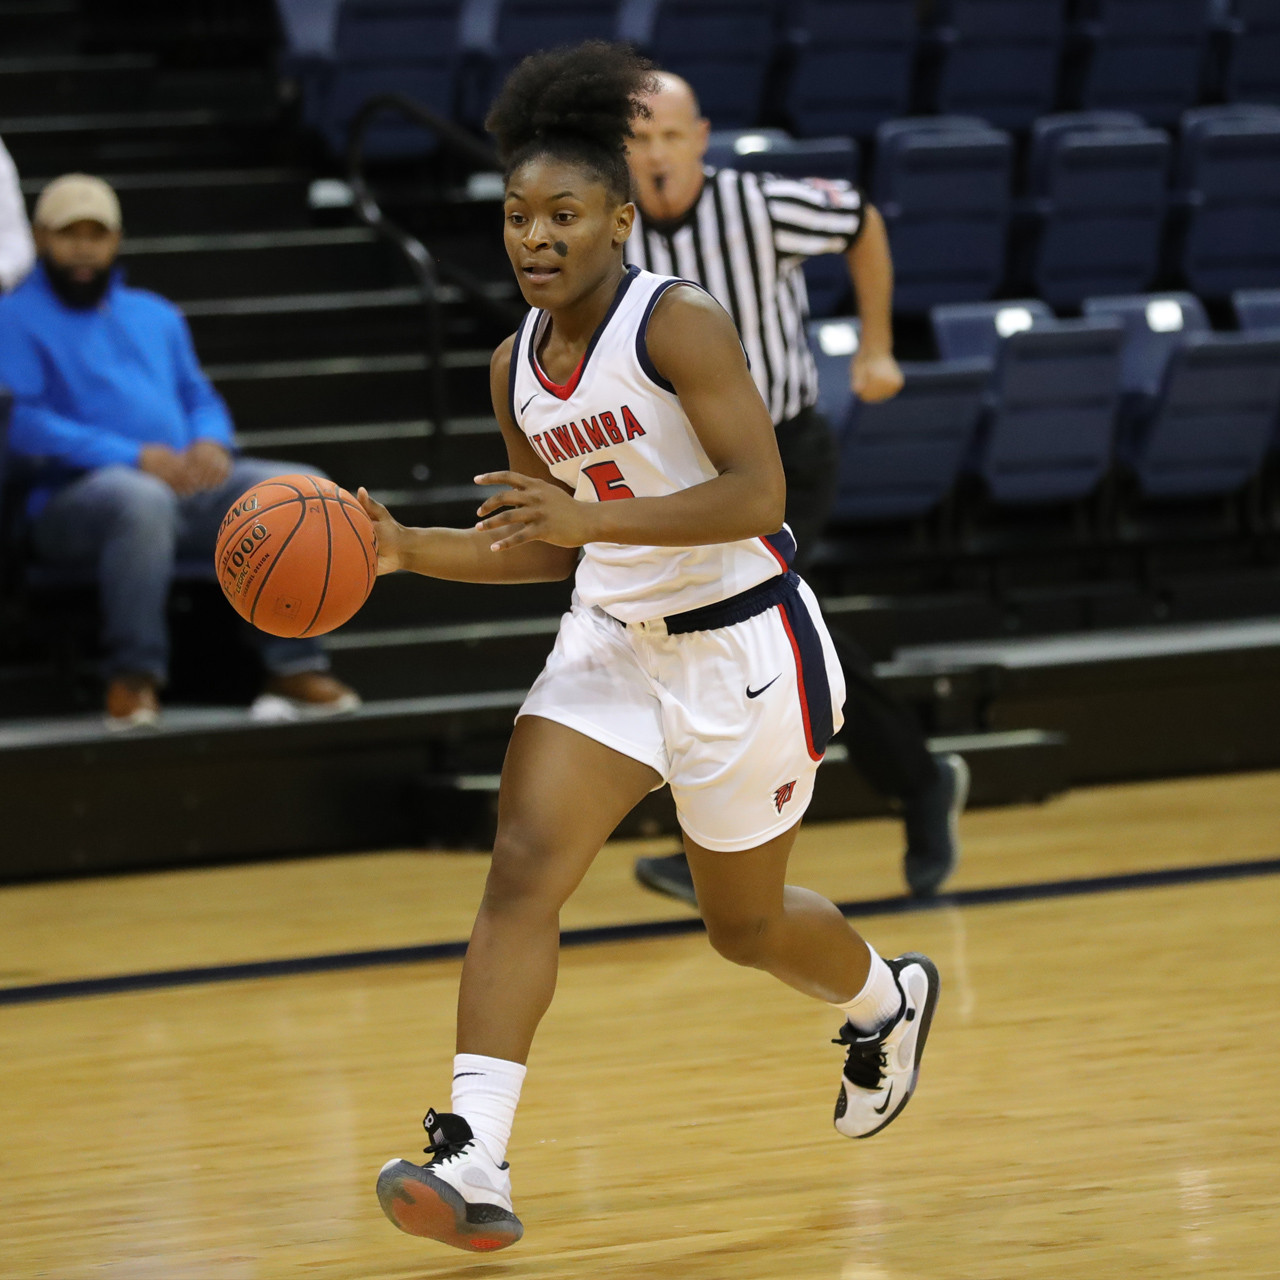 Lady Indians roll at Mississippi Delta